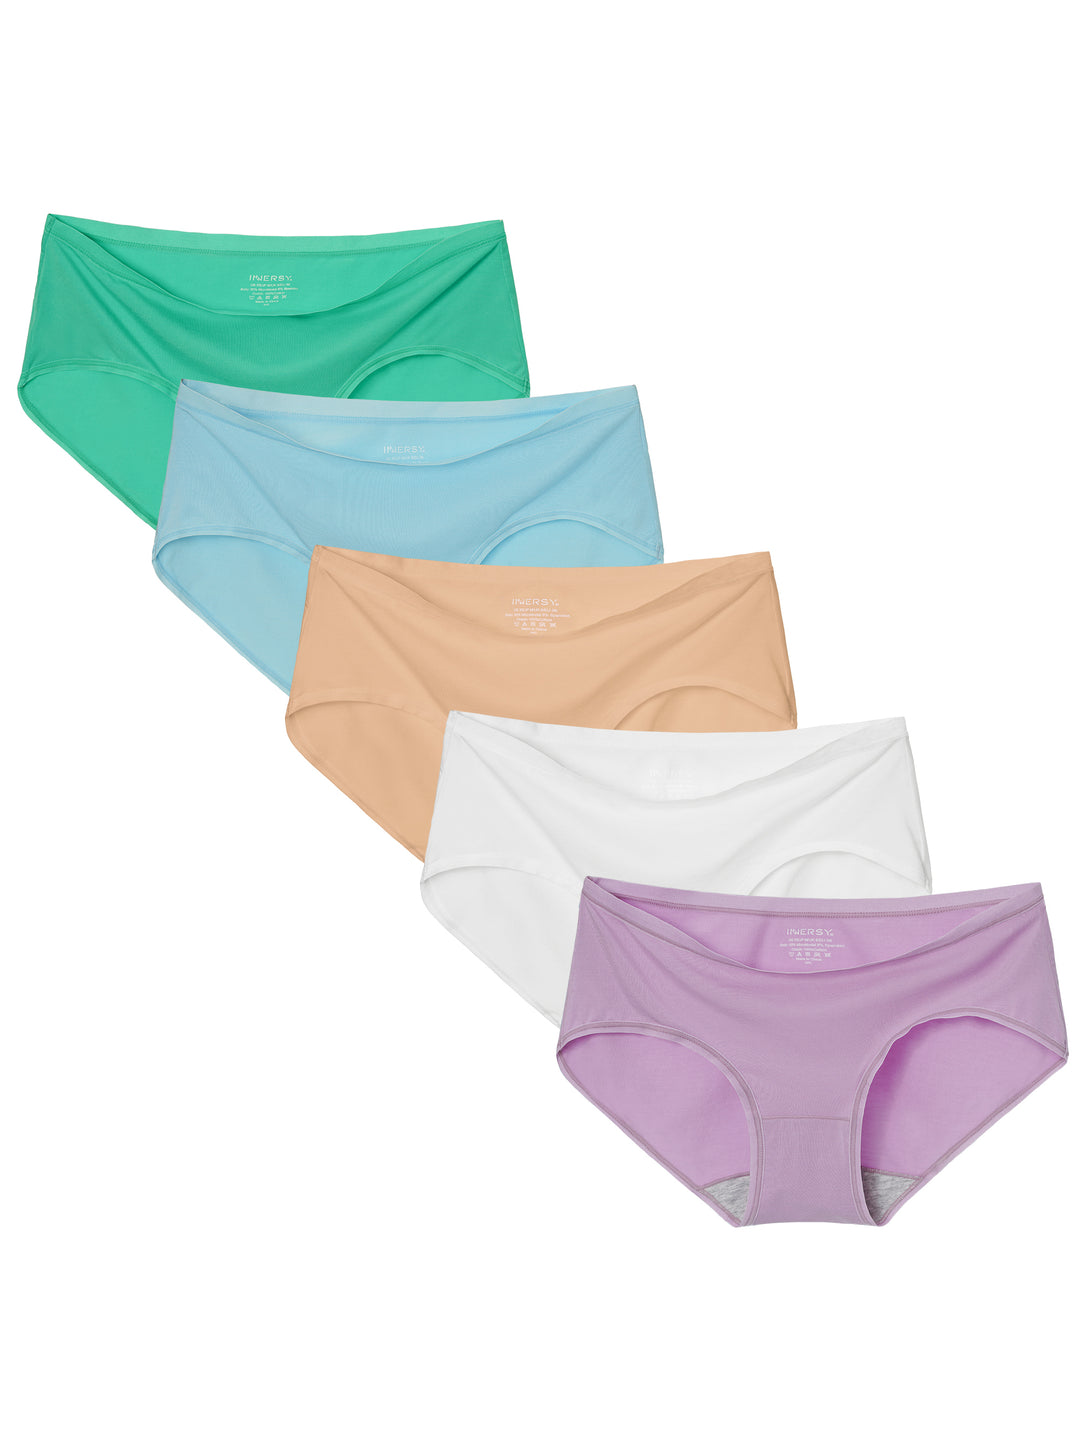 INNERSY Women's Soft & Thin No Show Modal Underwear Quick Dry Panties for  Summer 5-Pack - AliExpress